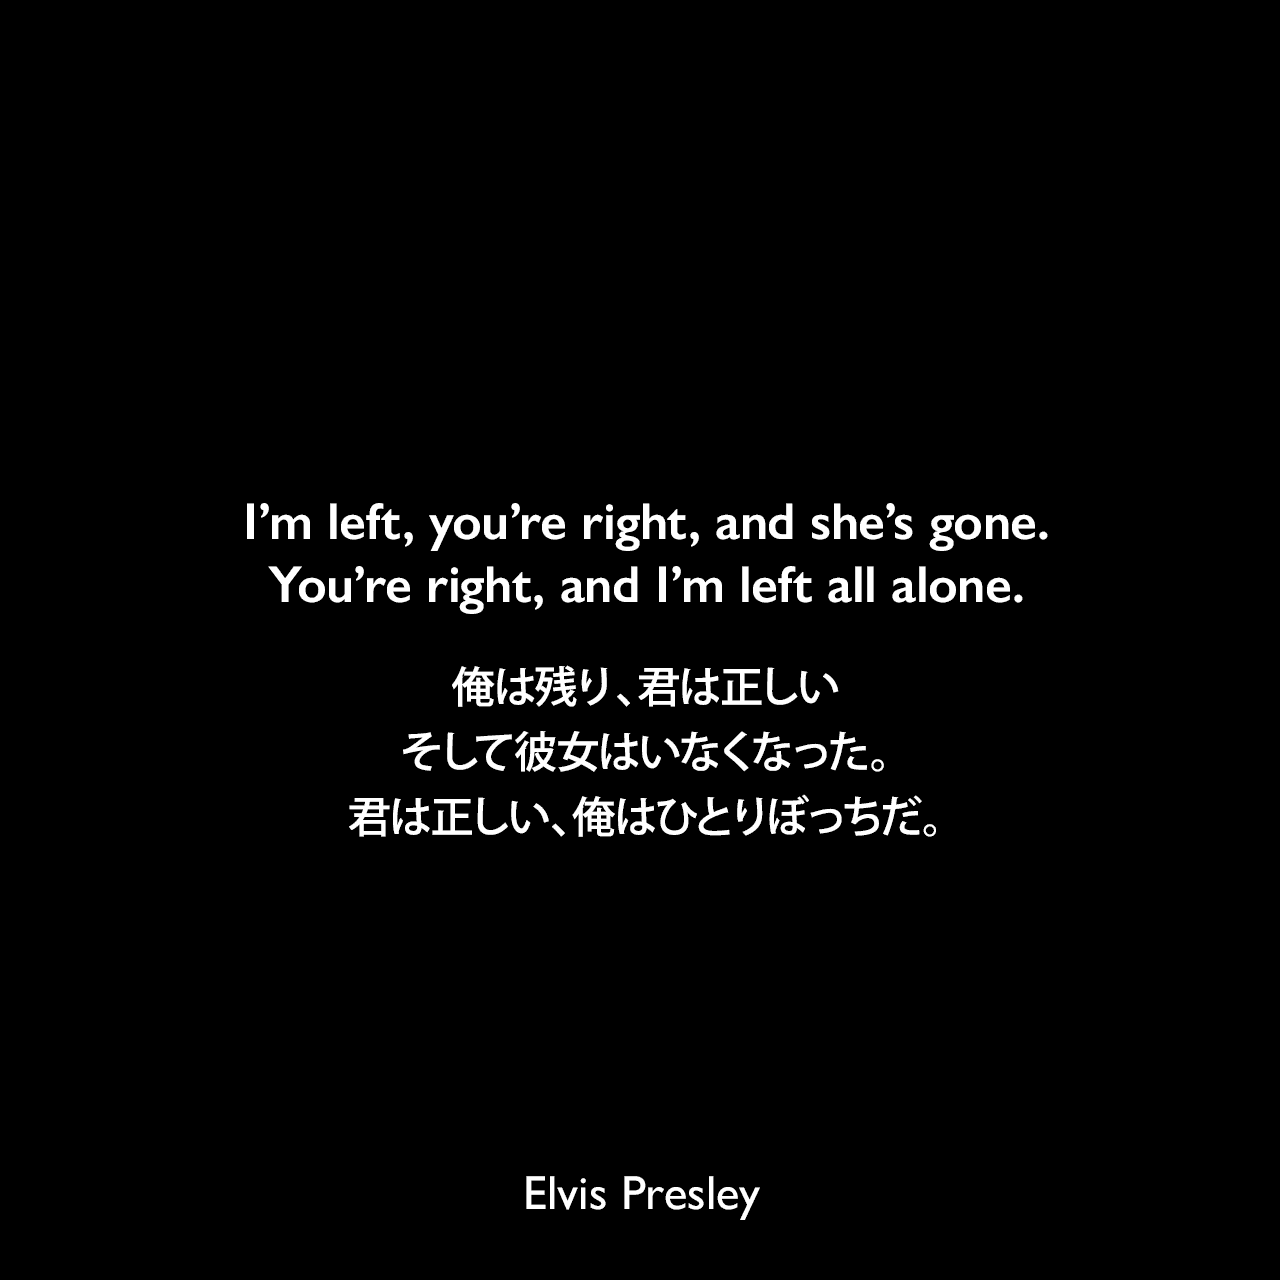 I’m left, you’re right, and she’s gone. You’re right, and I’m left all alone.俺は残り、君は正しい、そして彼女はいなくなった。君は正しい、俺はひとりぼっちだ。- プレスリーの曲「I'm Left, You're Right, She's Gone」よりElvis Presley